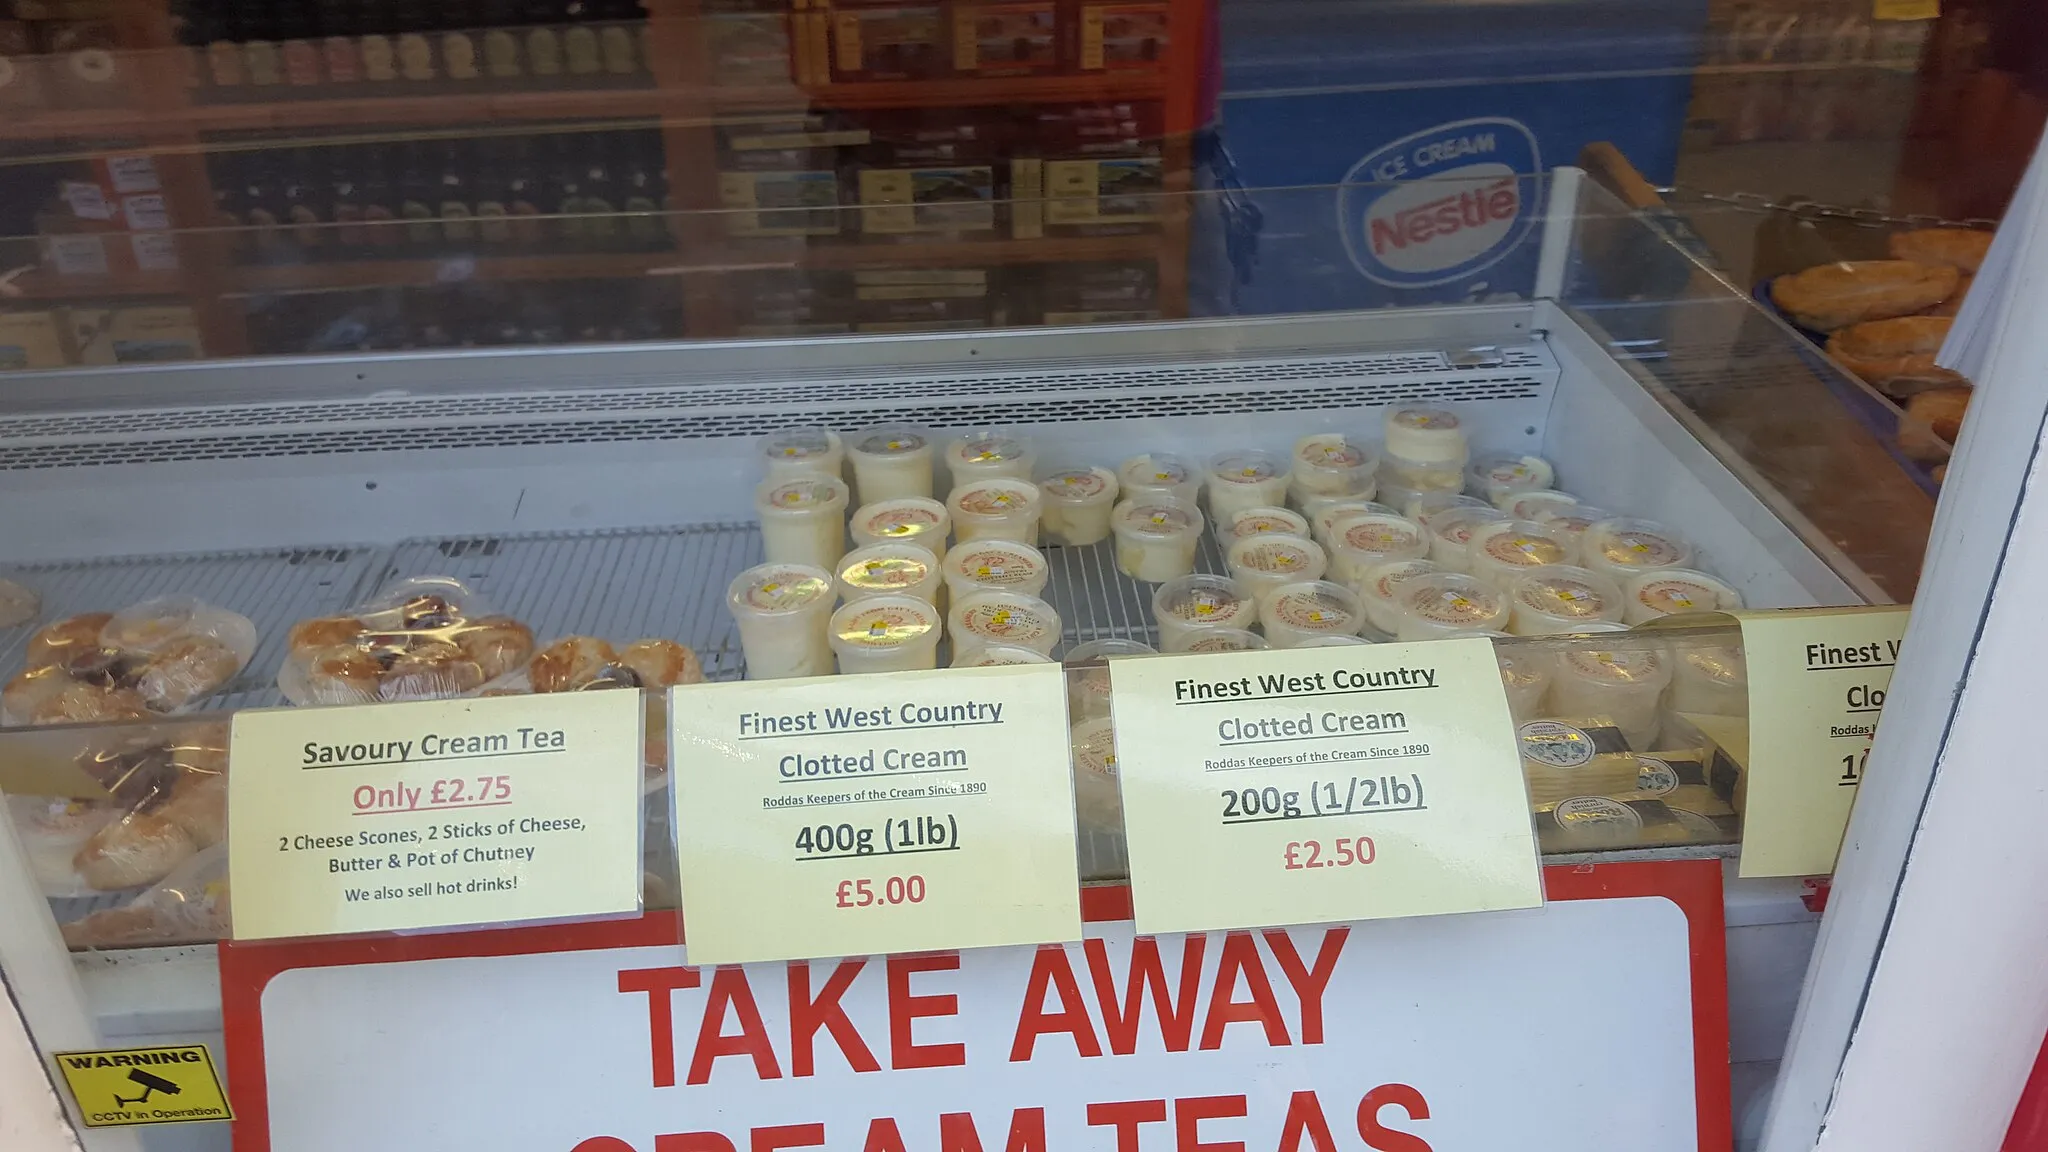 Photo showing: Take away cream teas with clotted cream